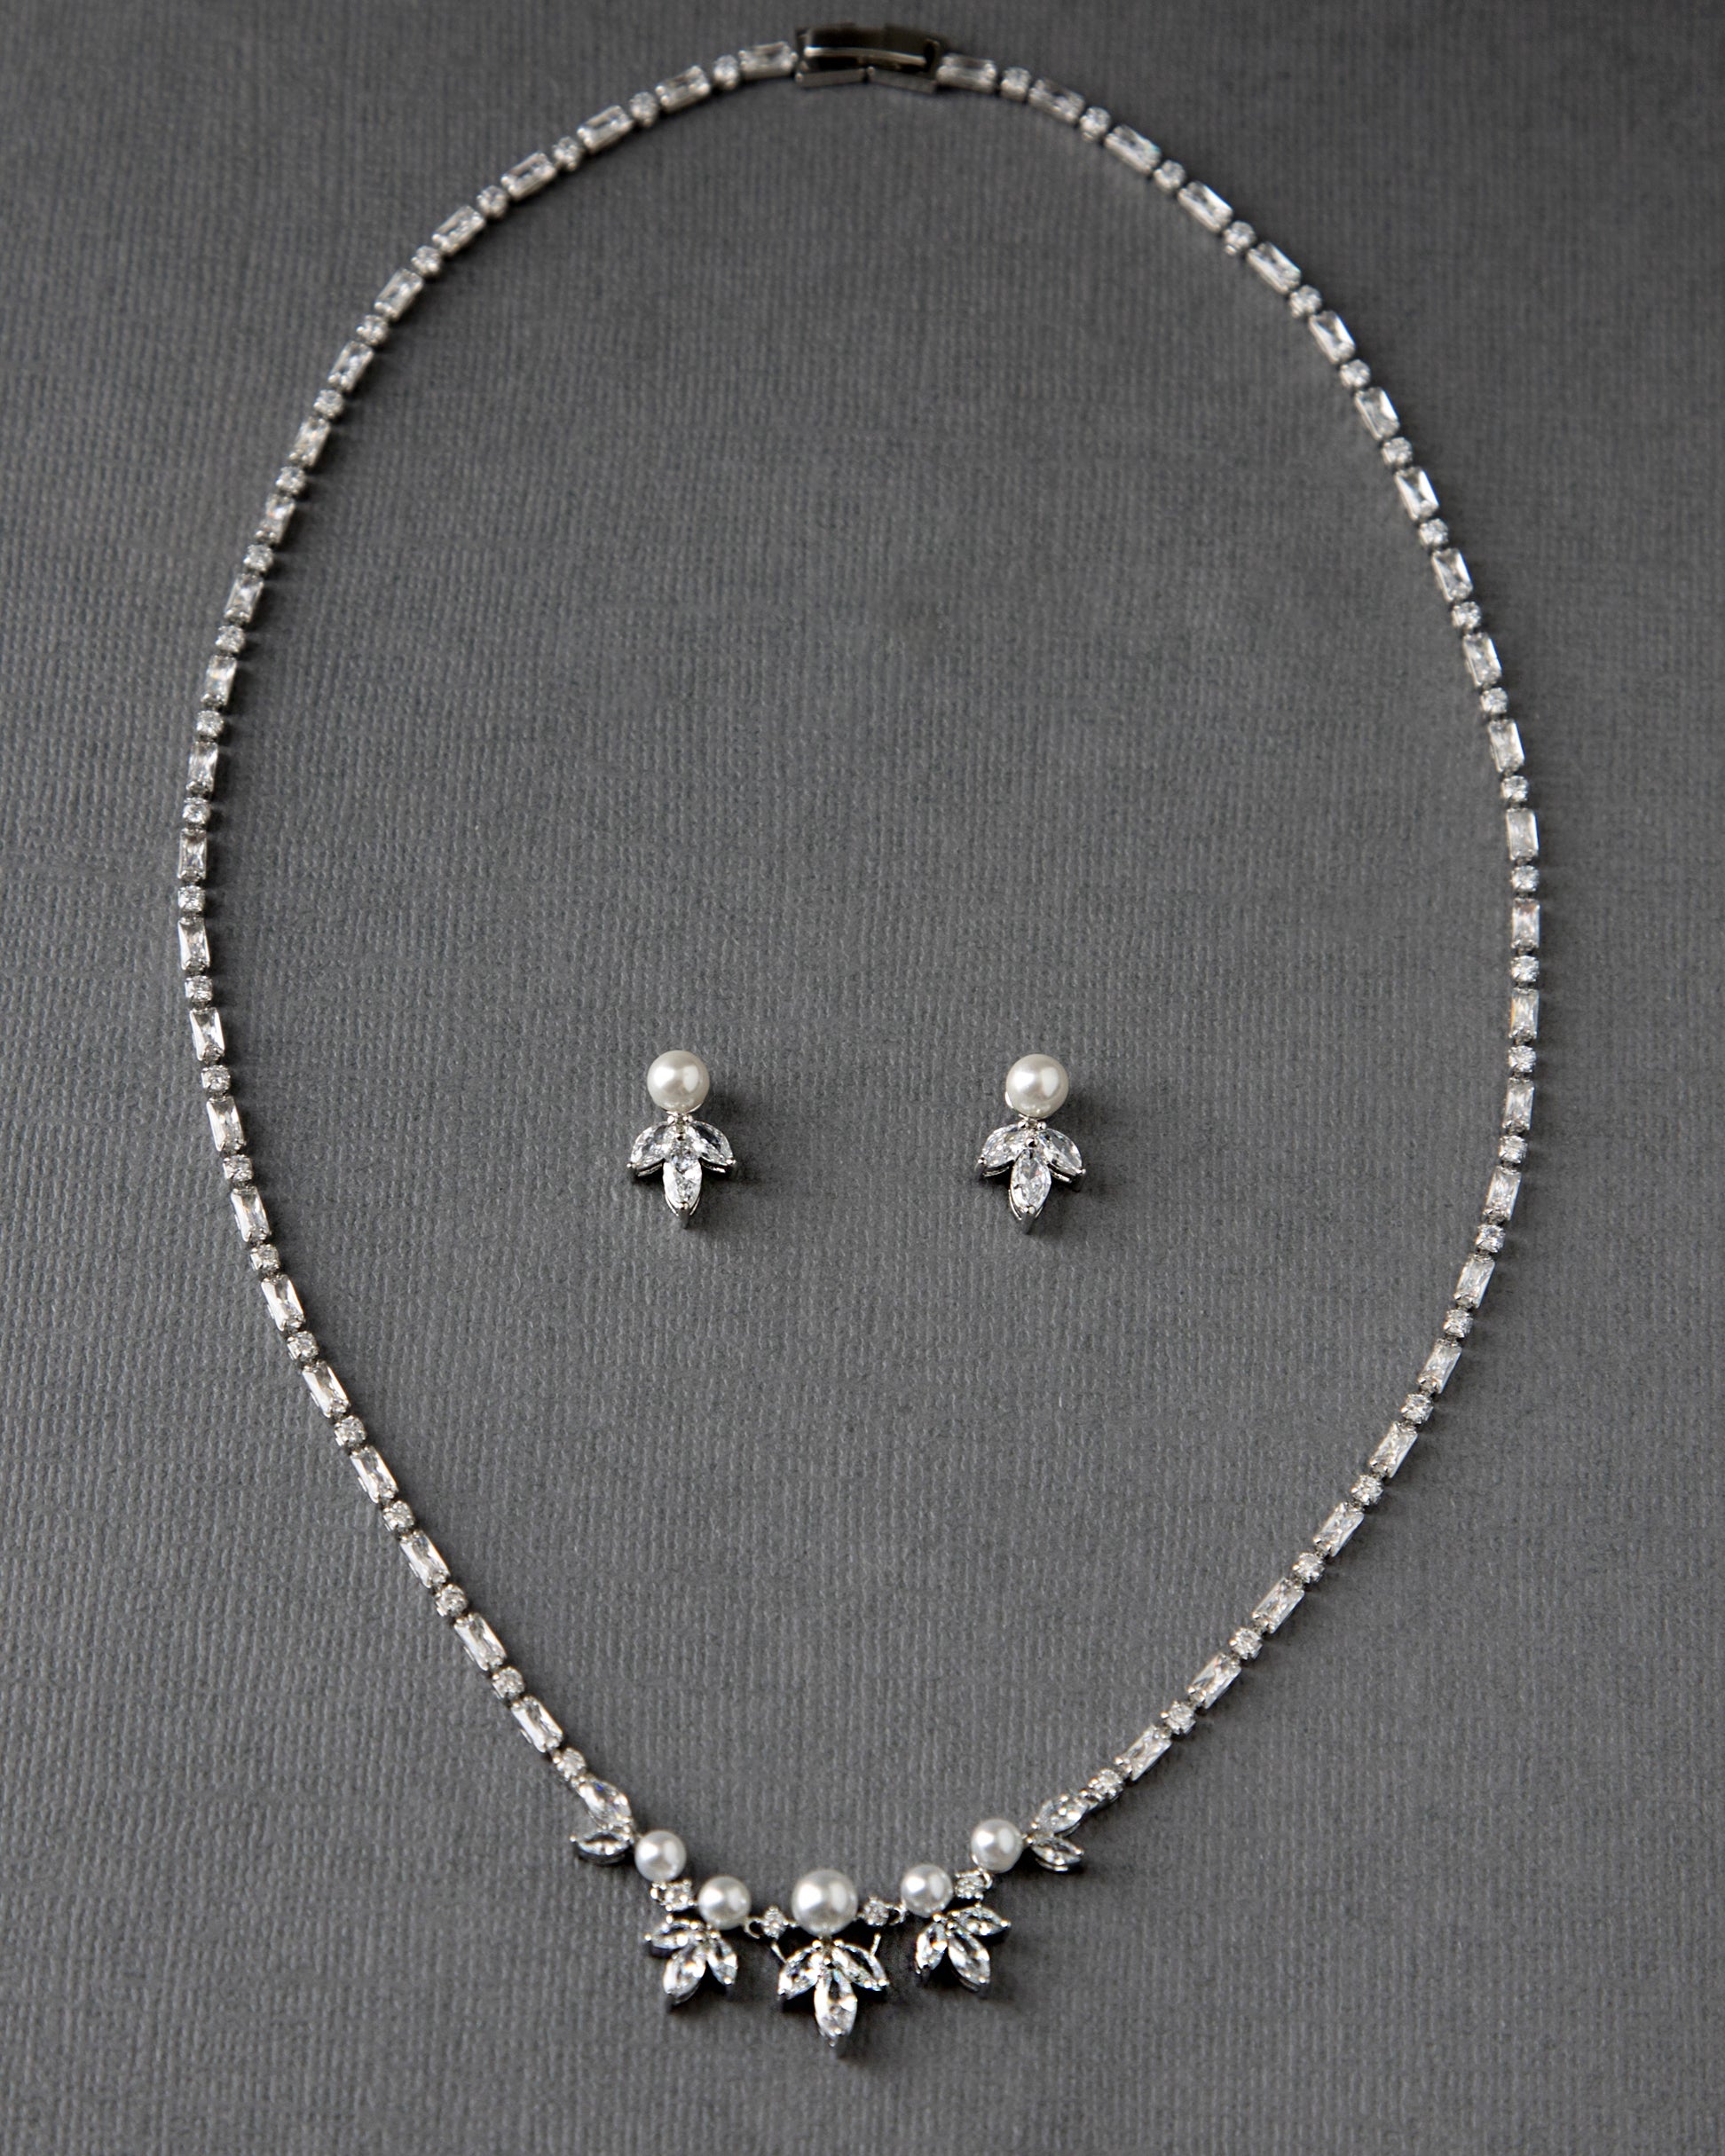 Bridal Necklace Set of Baguette CZ and Pearls - Cassandra Lynne